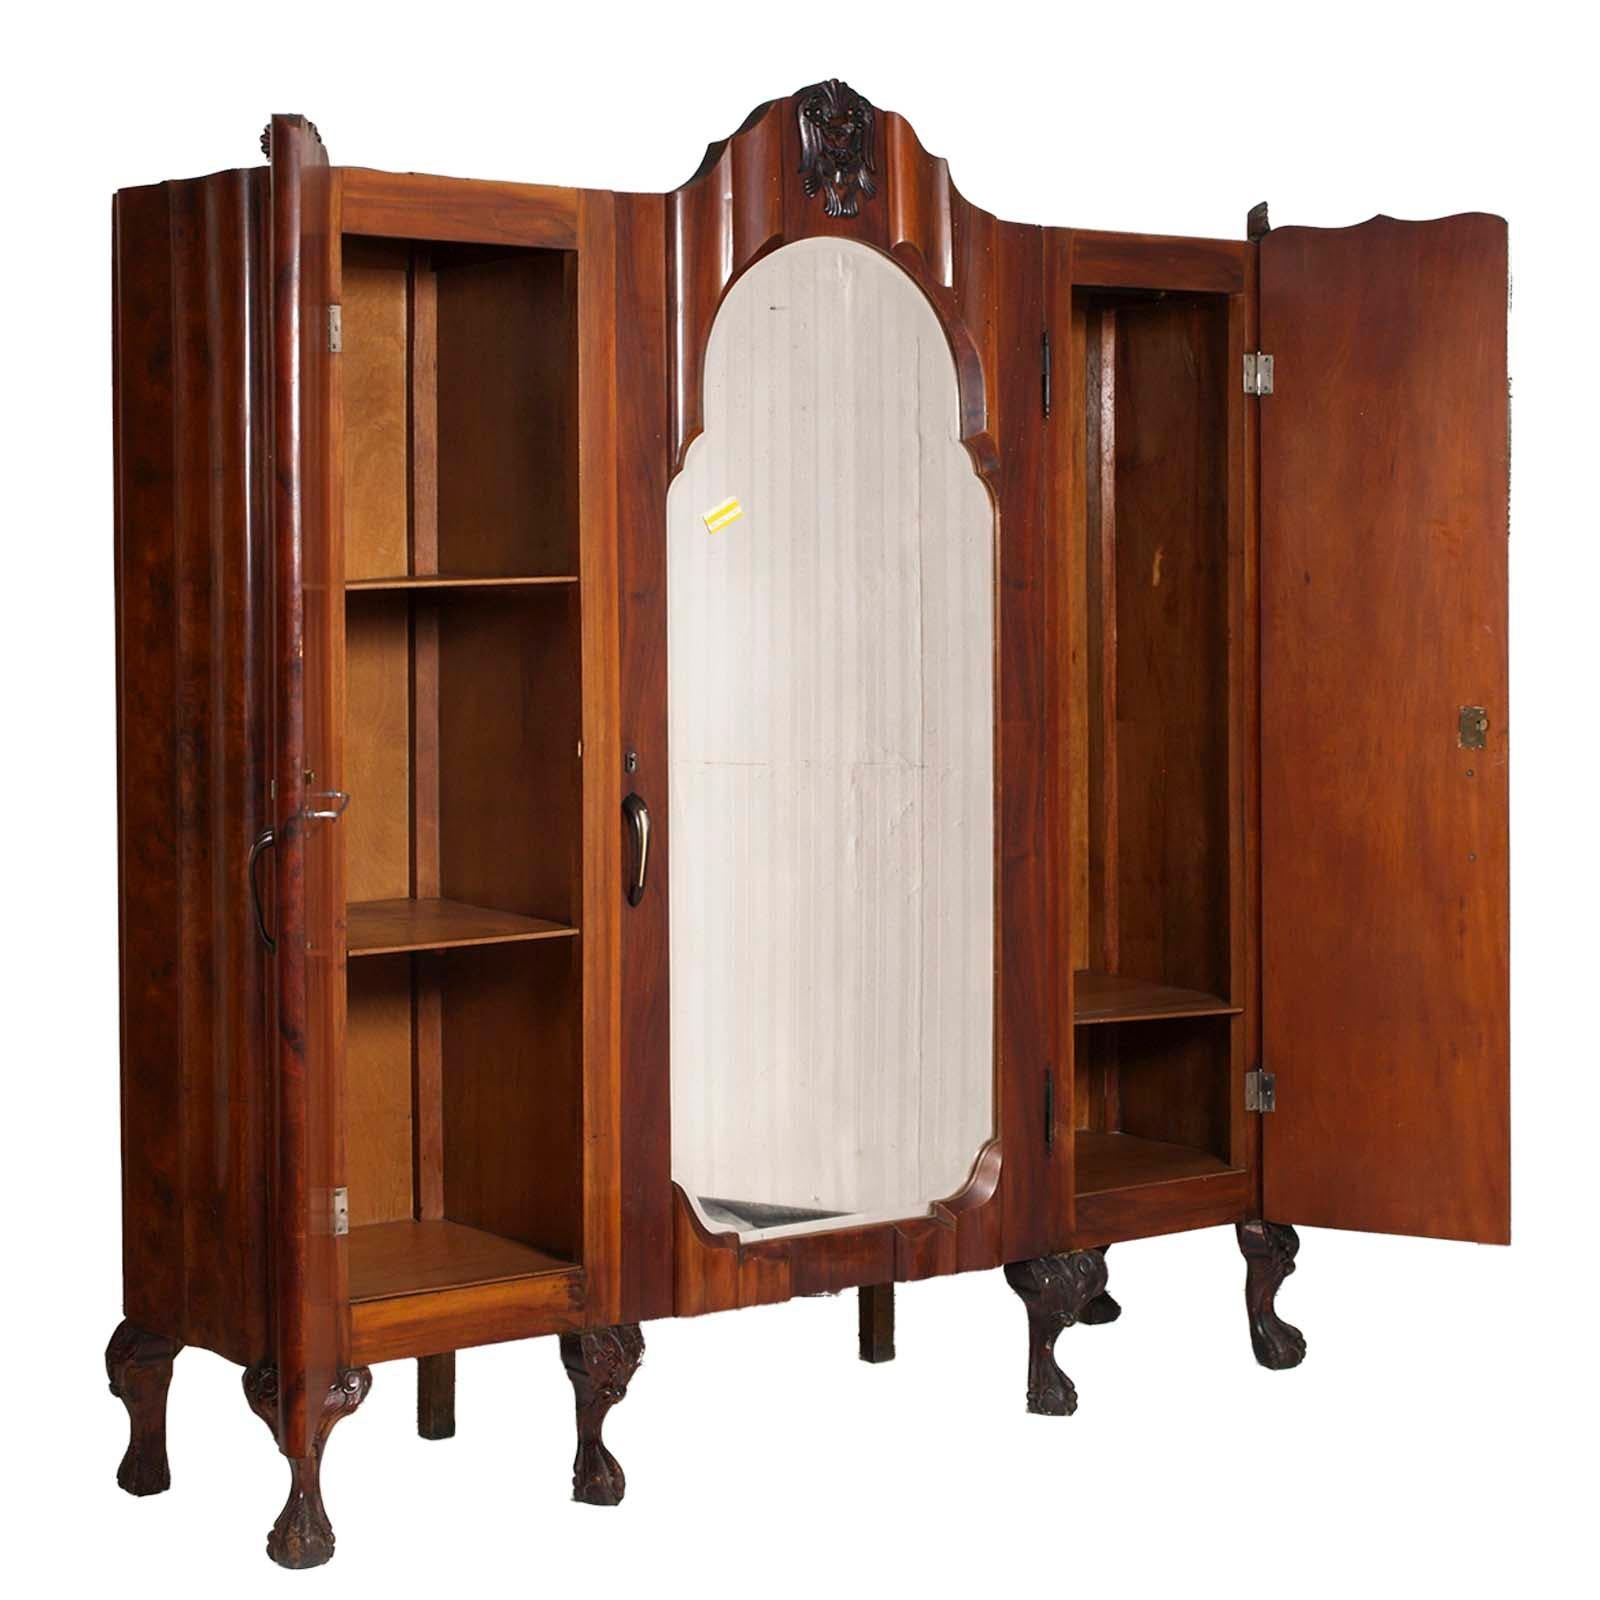 Large early 20th century Venetian Baroque wardrobe, by Testolini e Salviati, in walnut and walnut briar, with bevelled mirror. Hand carved legs and decorations in solid walnut. With three doors; two internal compartment with two shelves and central